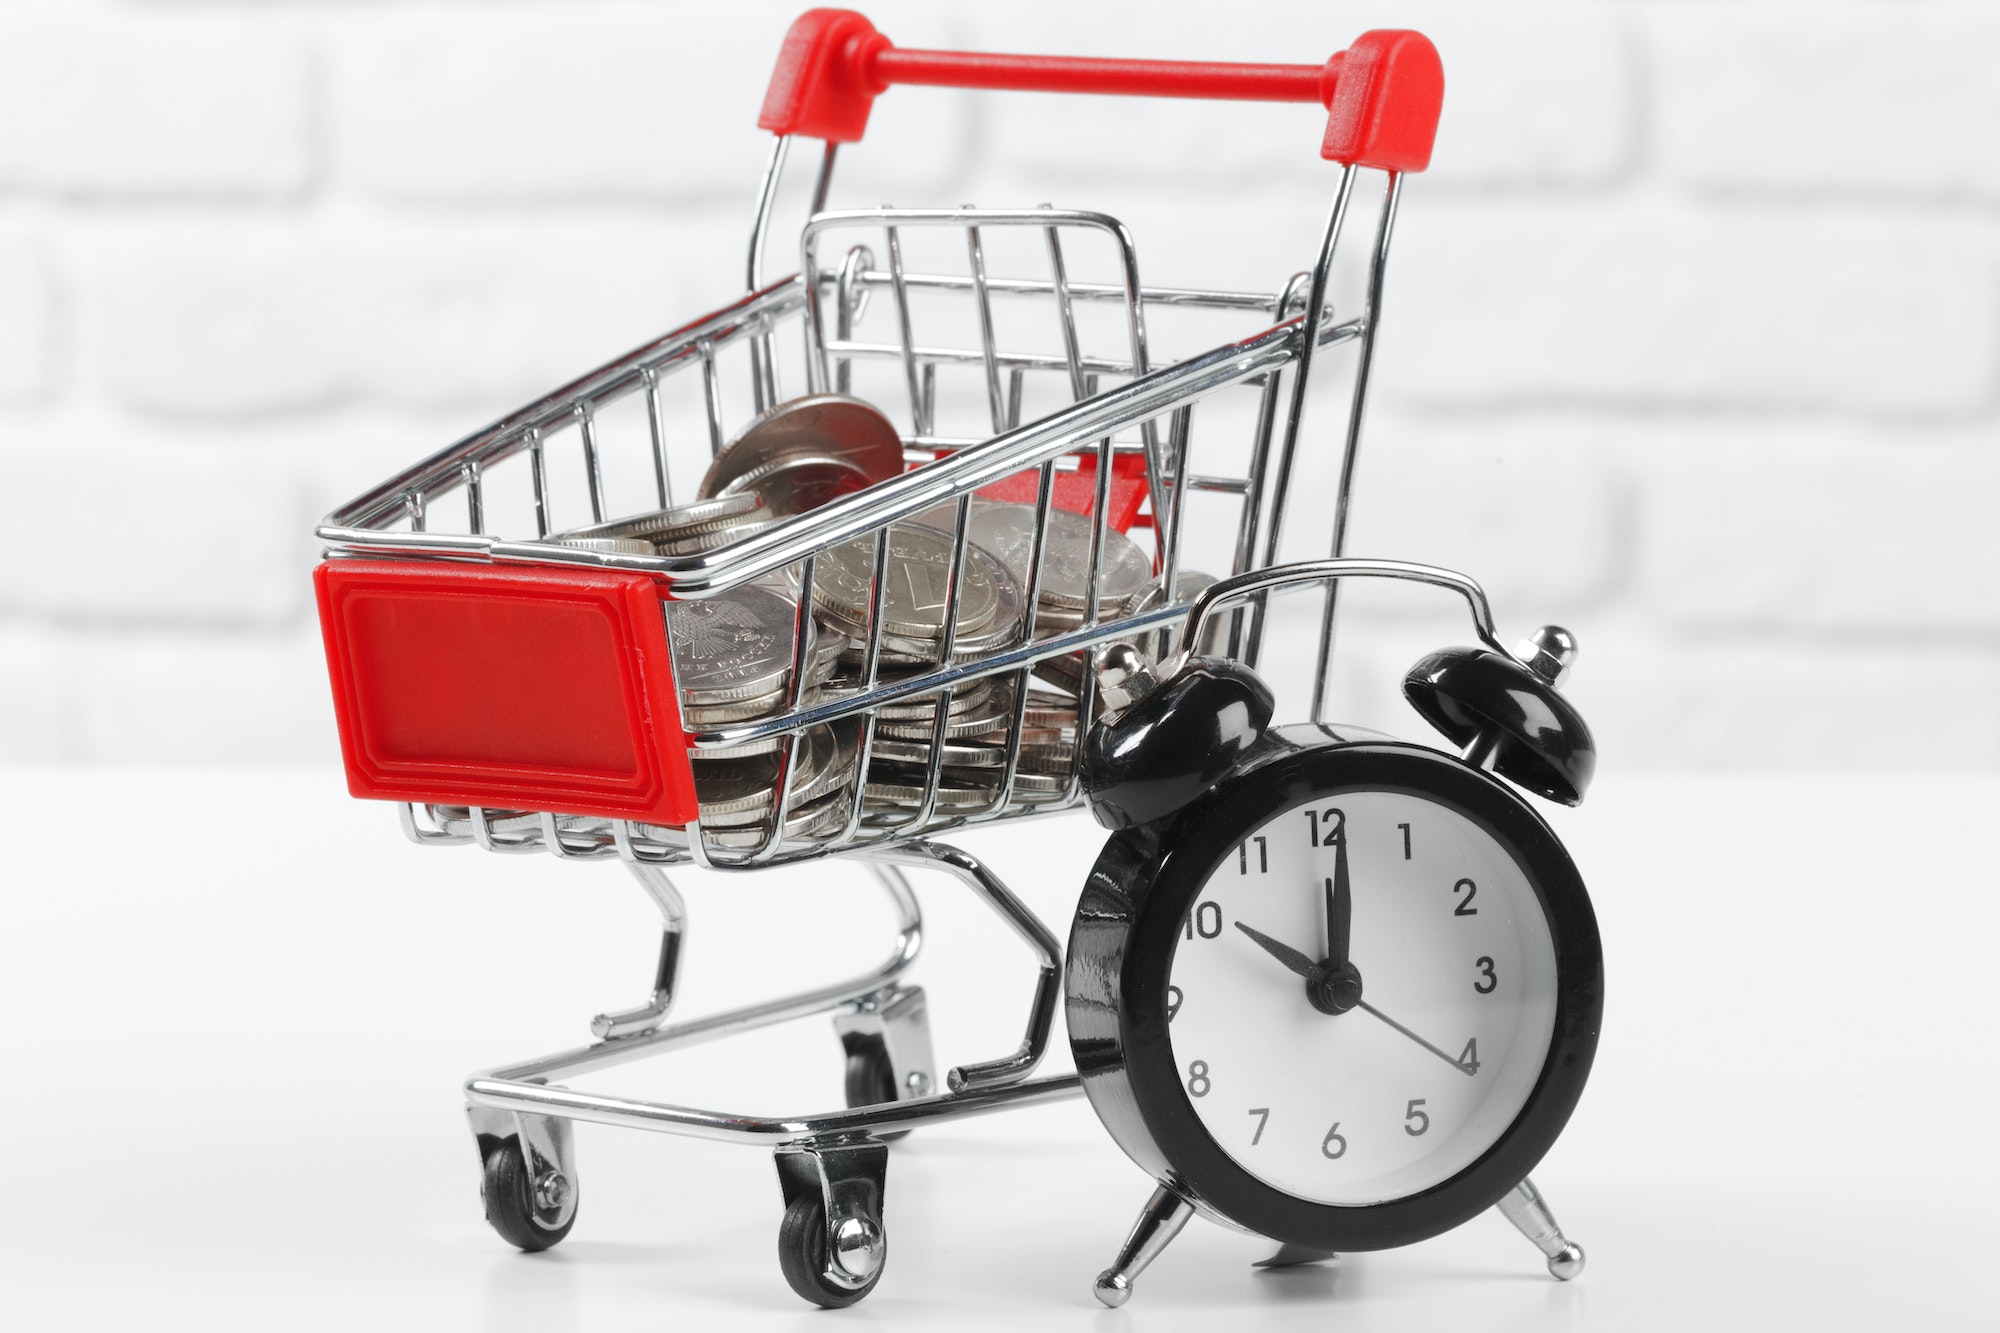 Time, e-commerce, saving and shopping concept